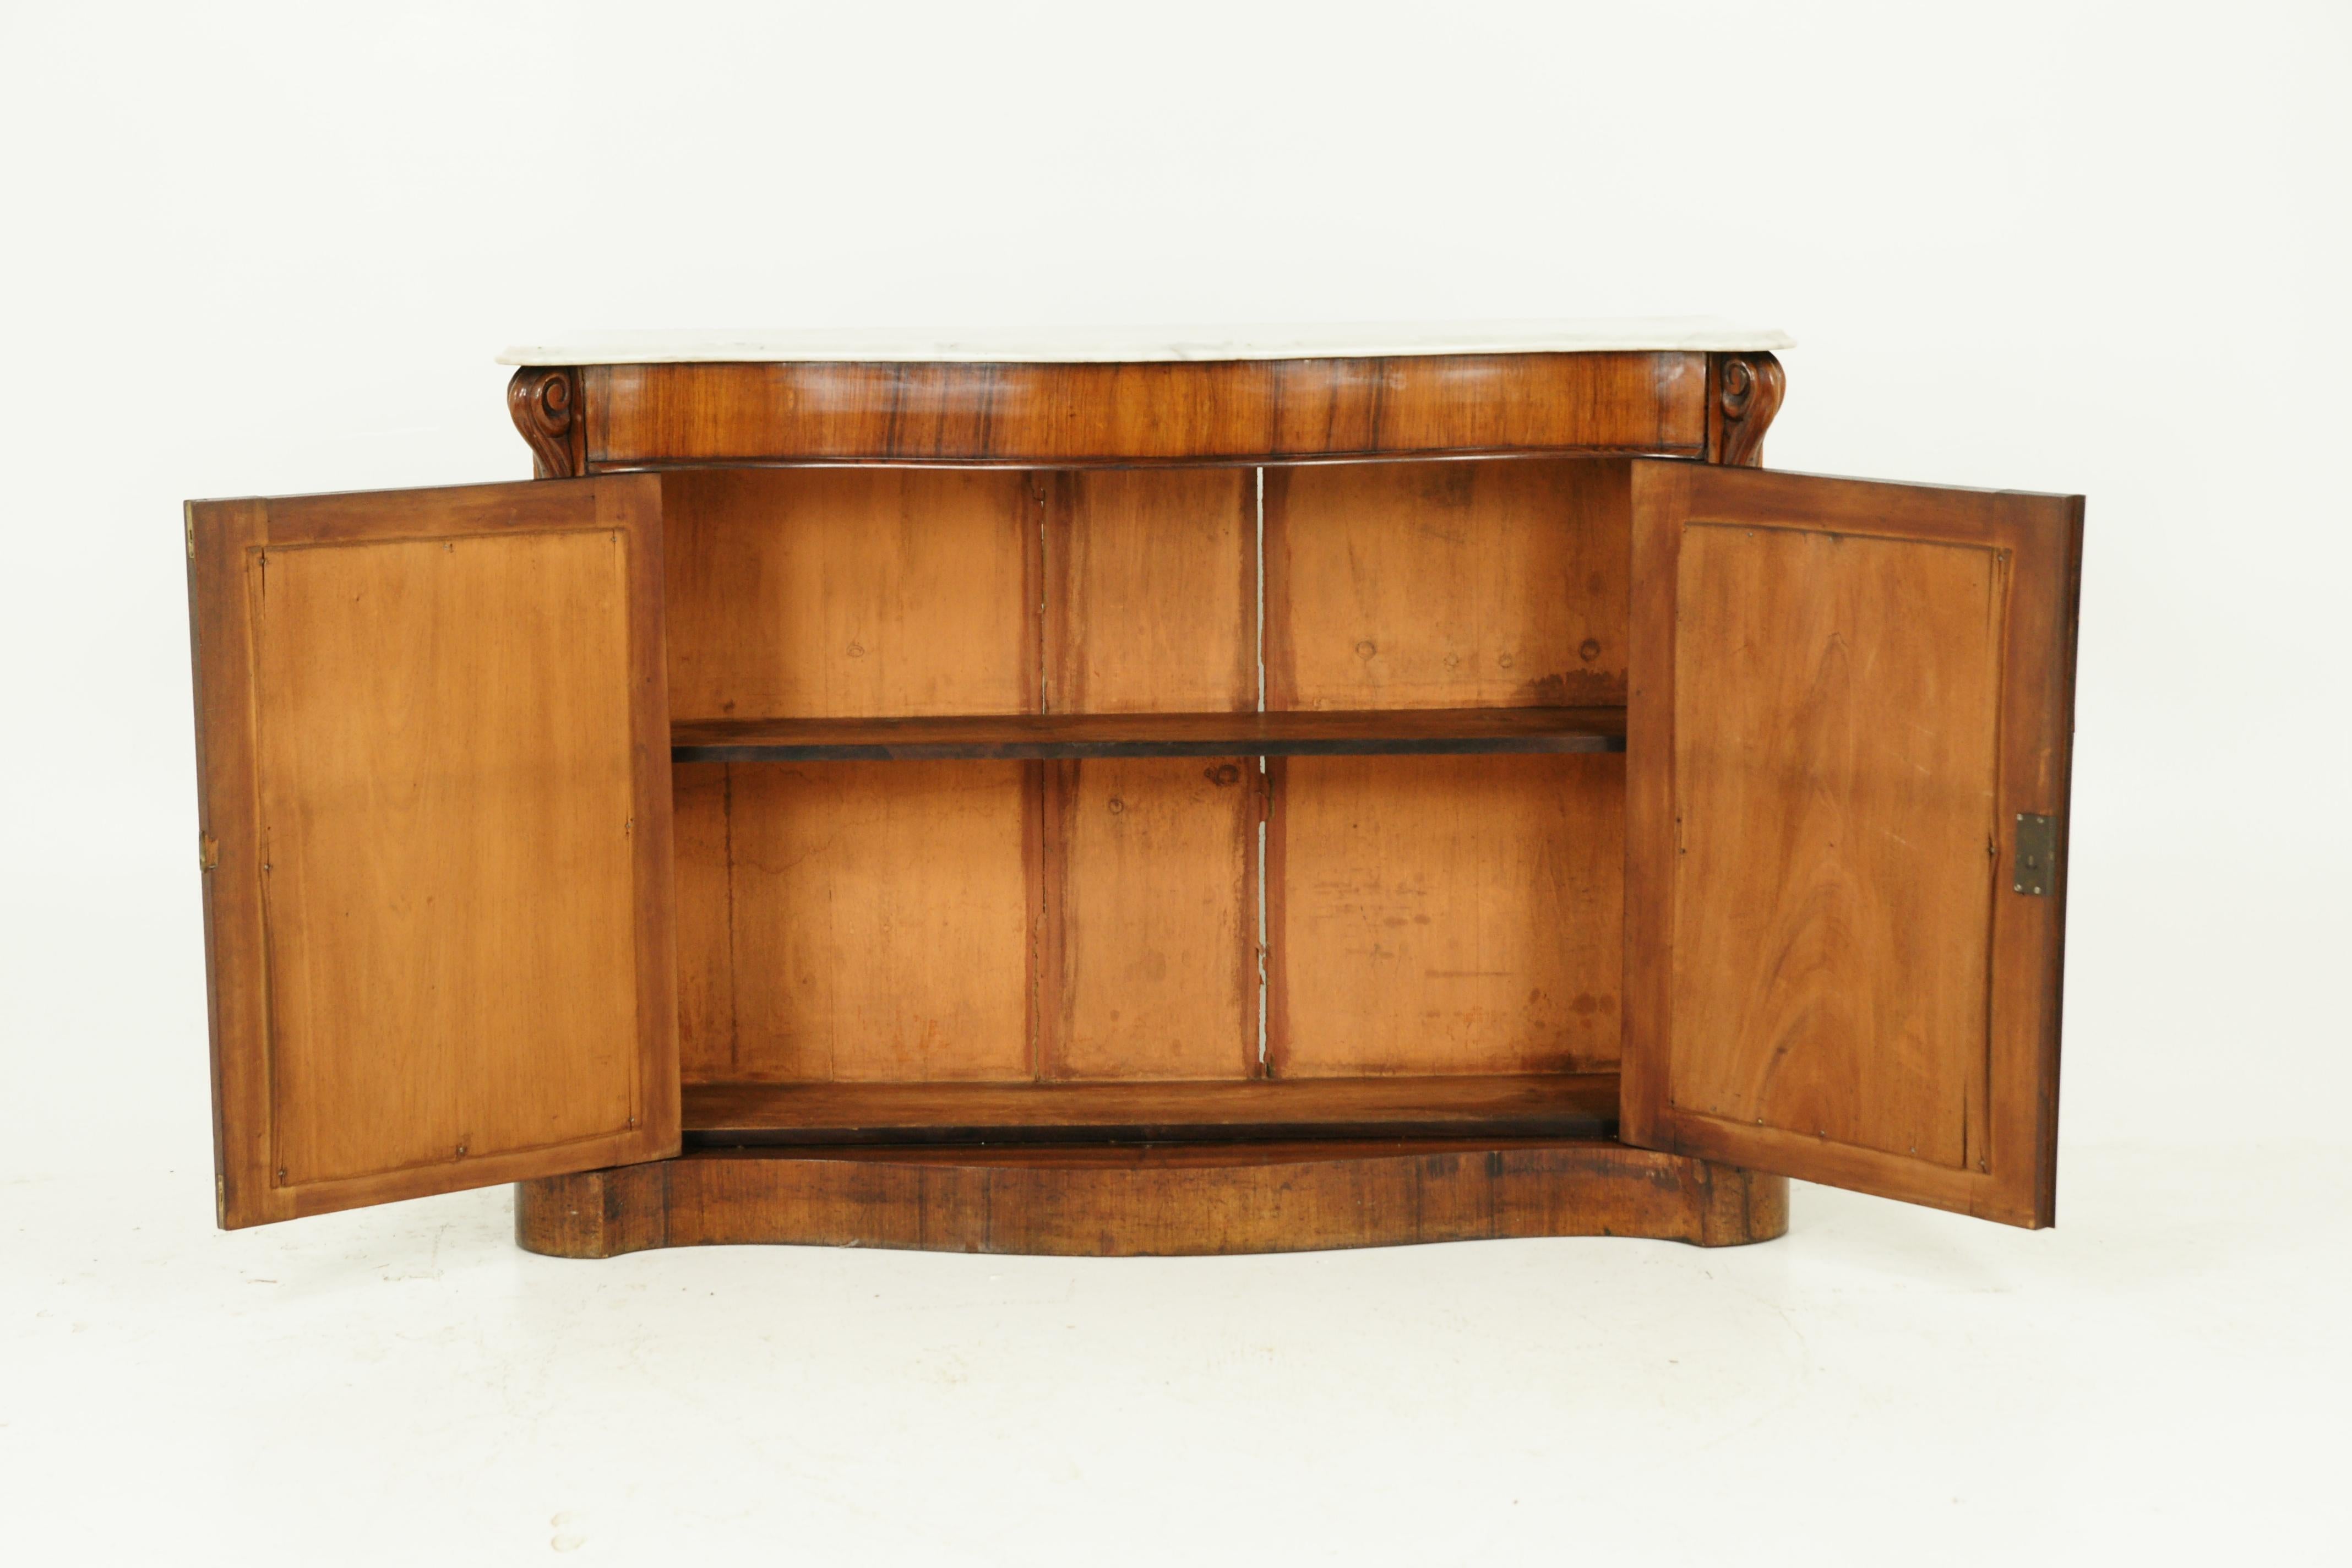 Antique Marble-Top Chiffonier, Credenza, Walnut Sideboard, Scotland 1870, B1563

Scotland 1870
All original finish
Serpentine fronted white marble top above
Carved corbells to the ends at the top and bottom
Pair of rectangular mirrored doors
Oval